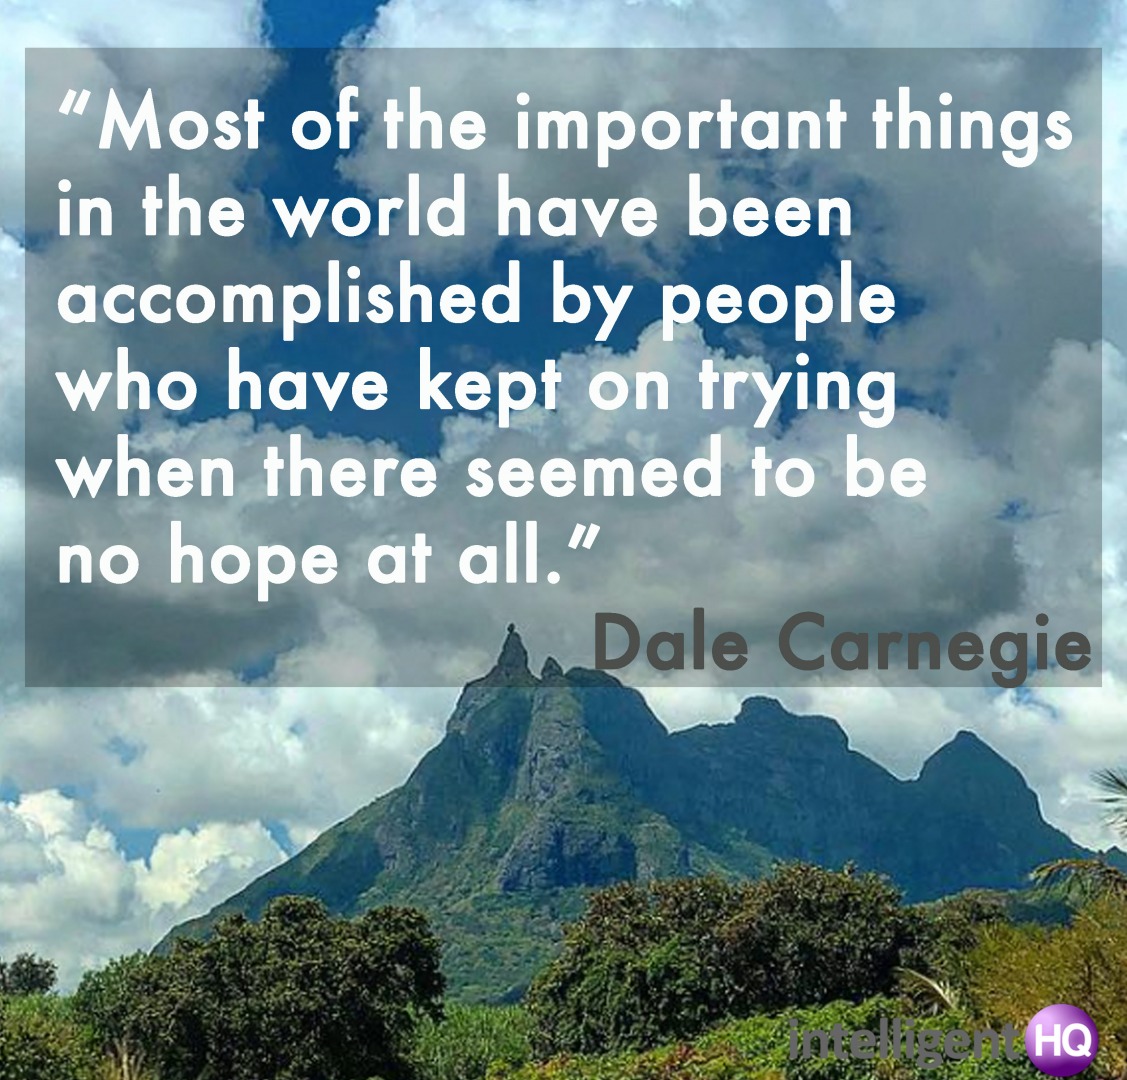 "Most of the important things in the world have been accomplished by people who have kept on trying when there seemed to be no hope at all." Dale Carnegie Intelligenthq